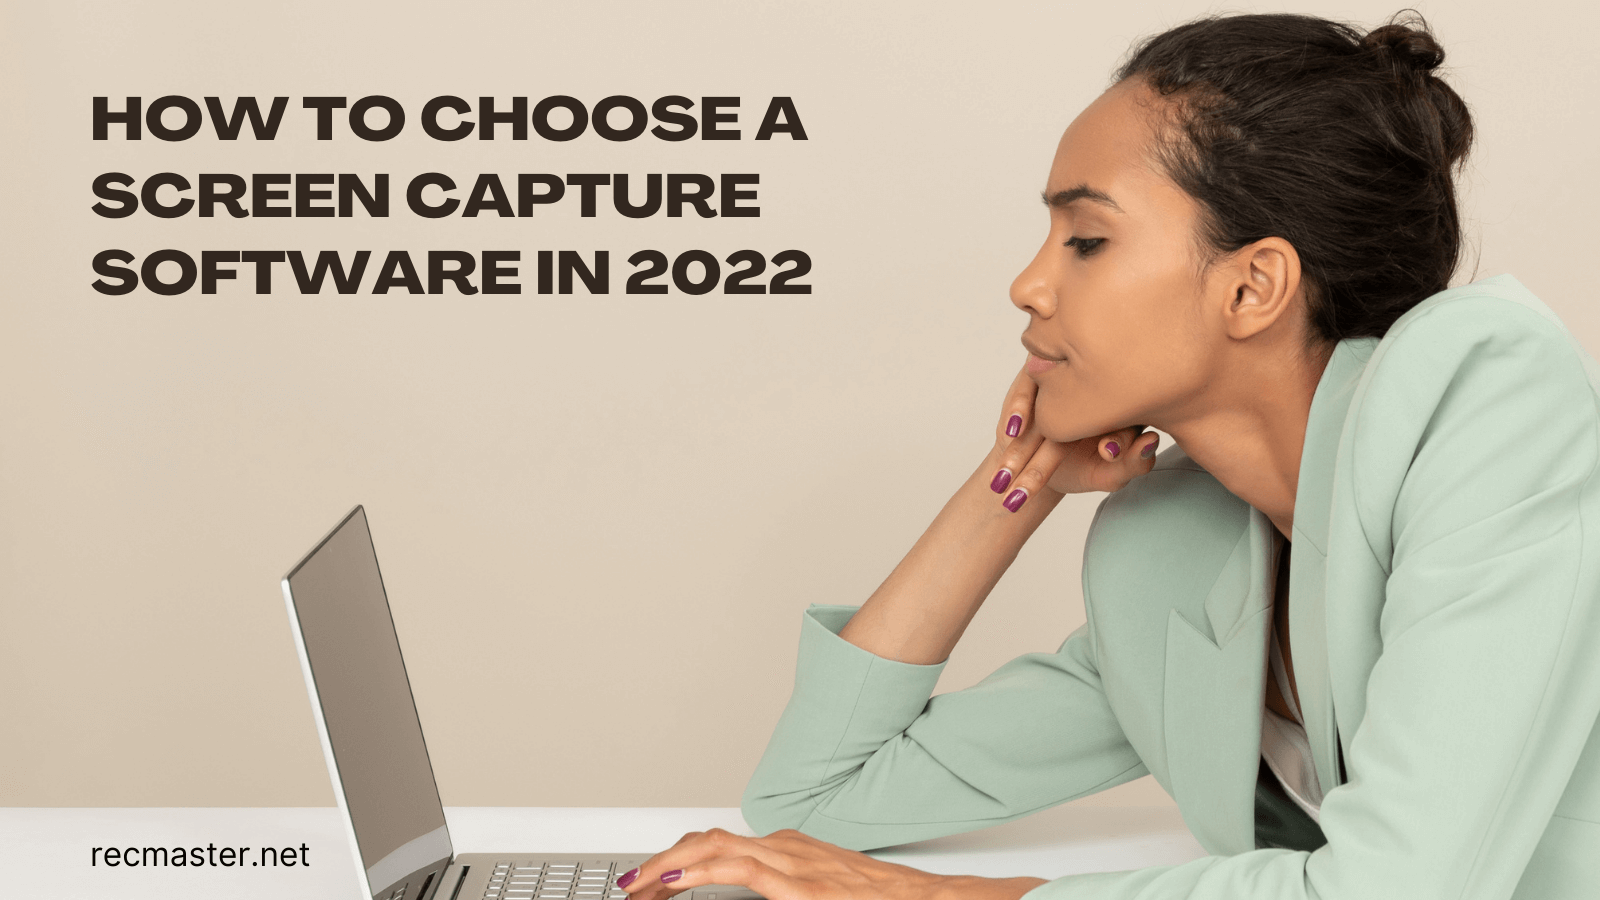 How to Choose A Screen Capture Software in 2022